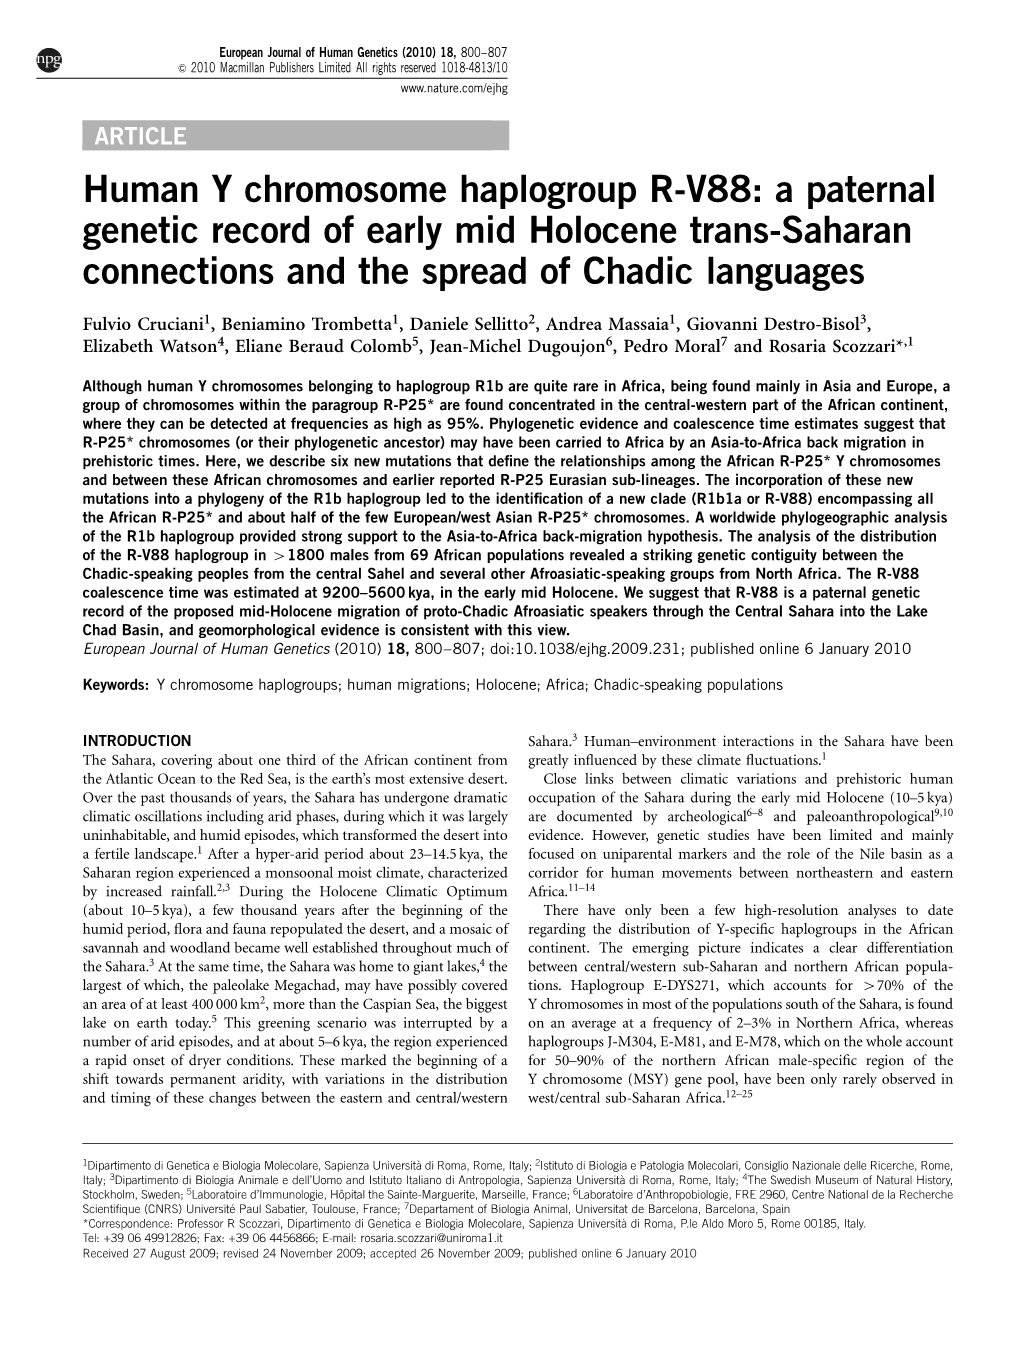 Human Y Chromosome Haplogroup R-V88: a Paternal Genetic Record of Early Mid Holocene Trans-Saharan Connections and the Spread of Chadic Languages